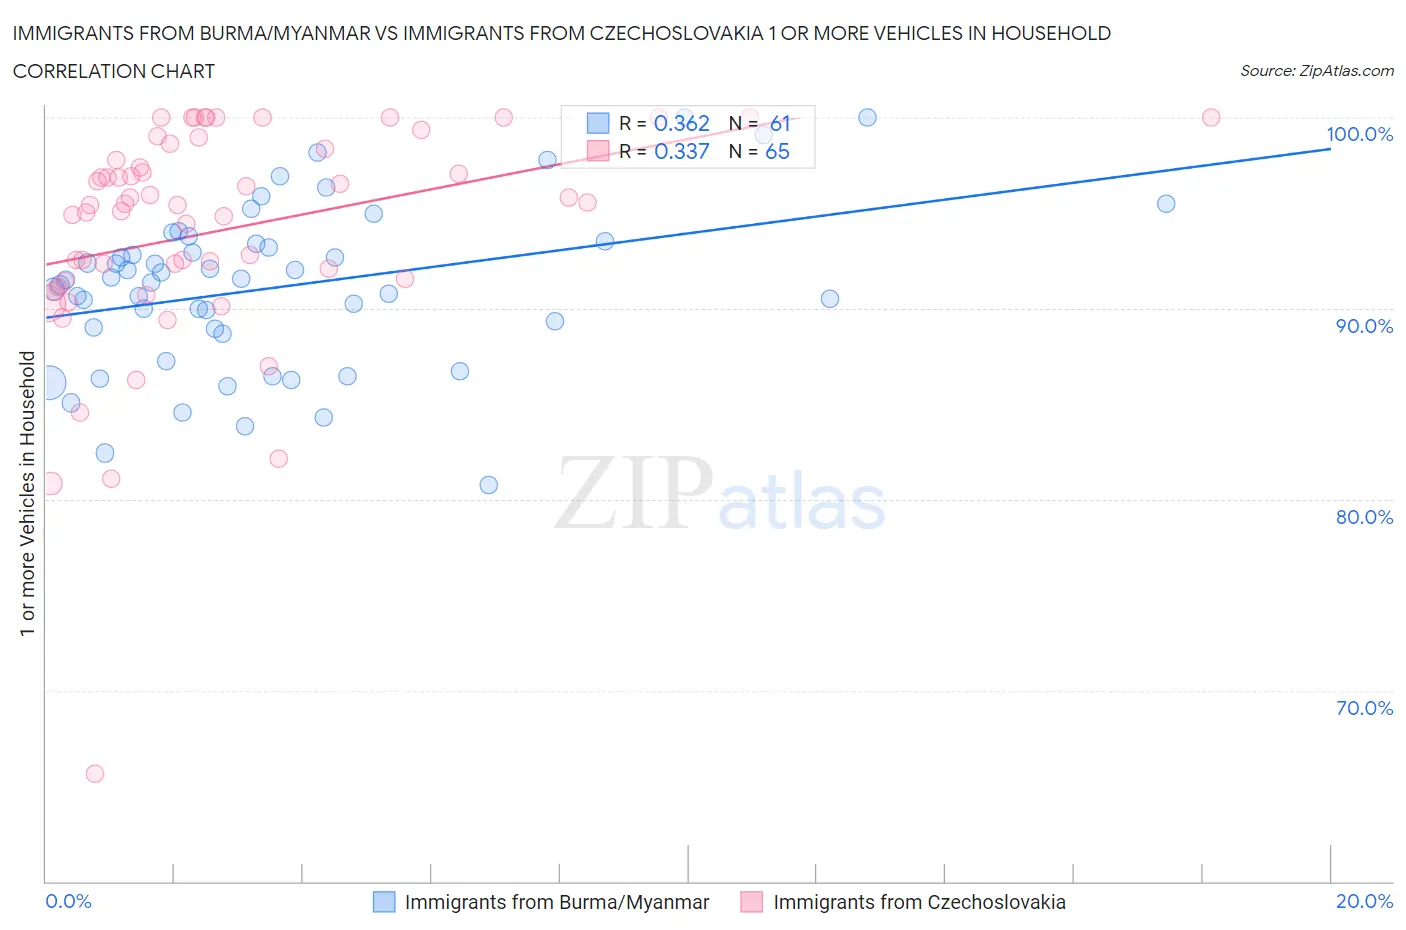 Immigrants from Burma/Myanmar vs Immigrants from Czechoslovakia 1 or more Vehicles in Household